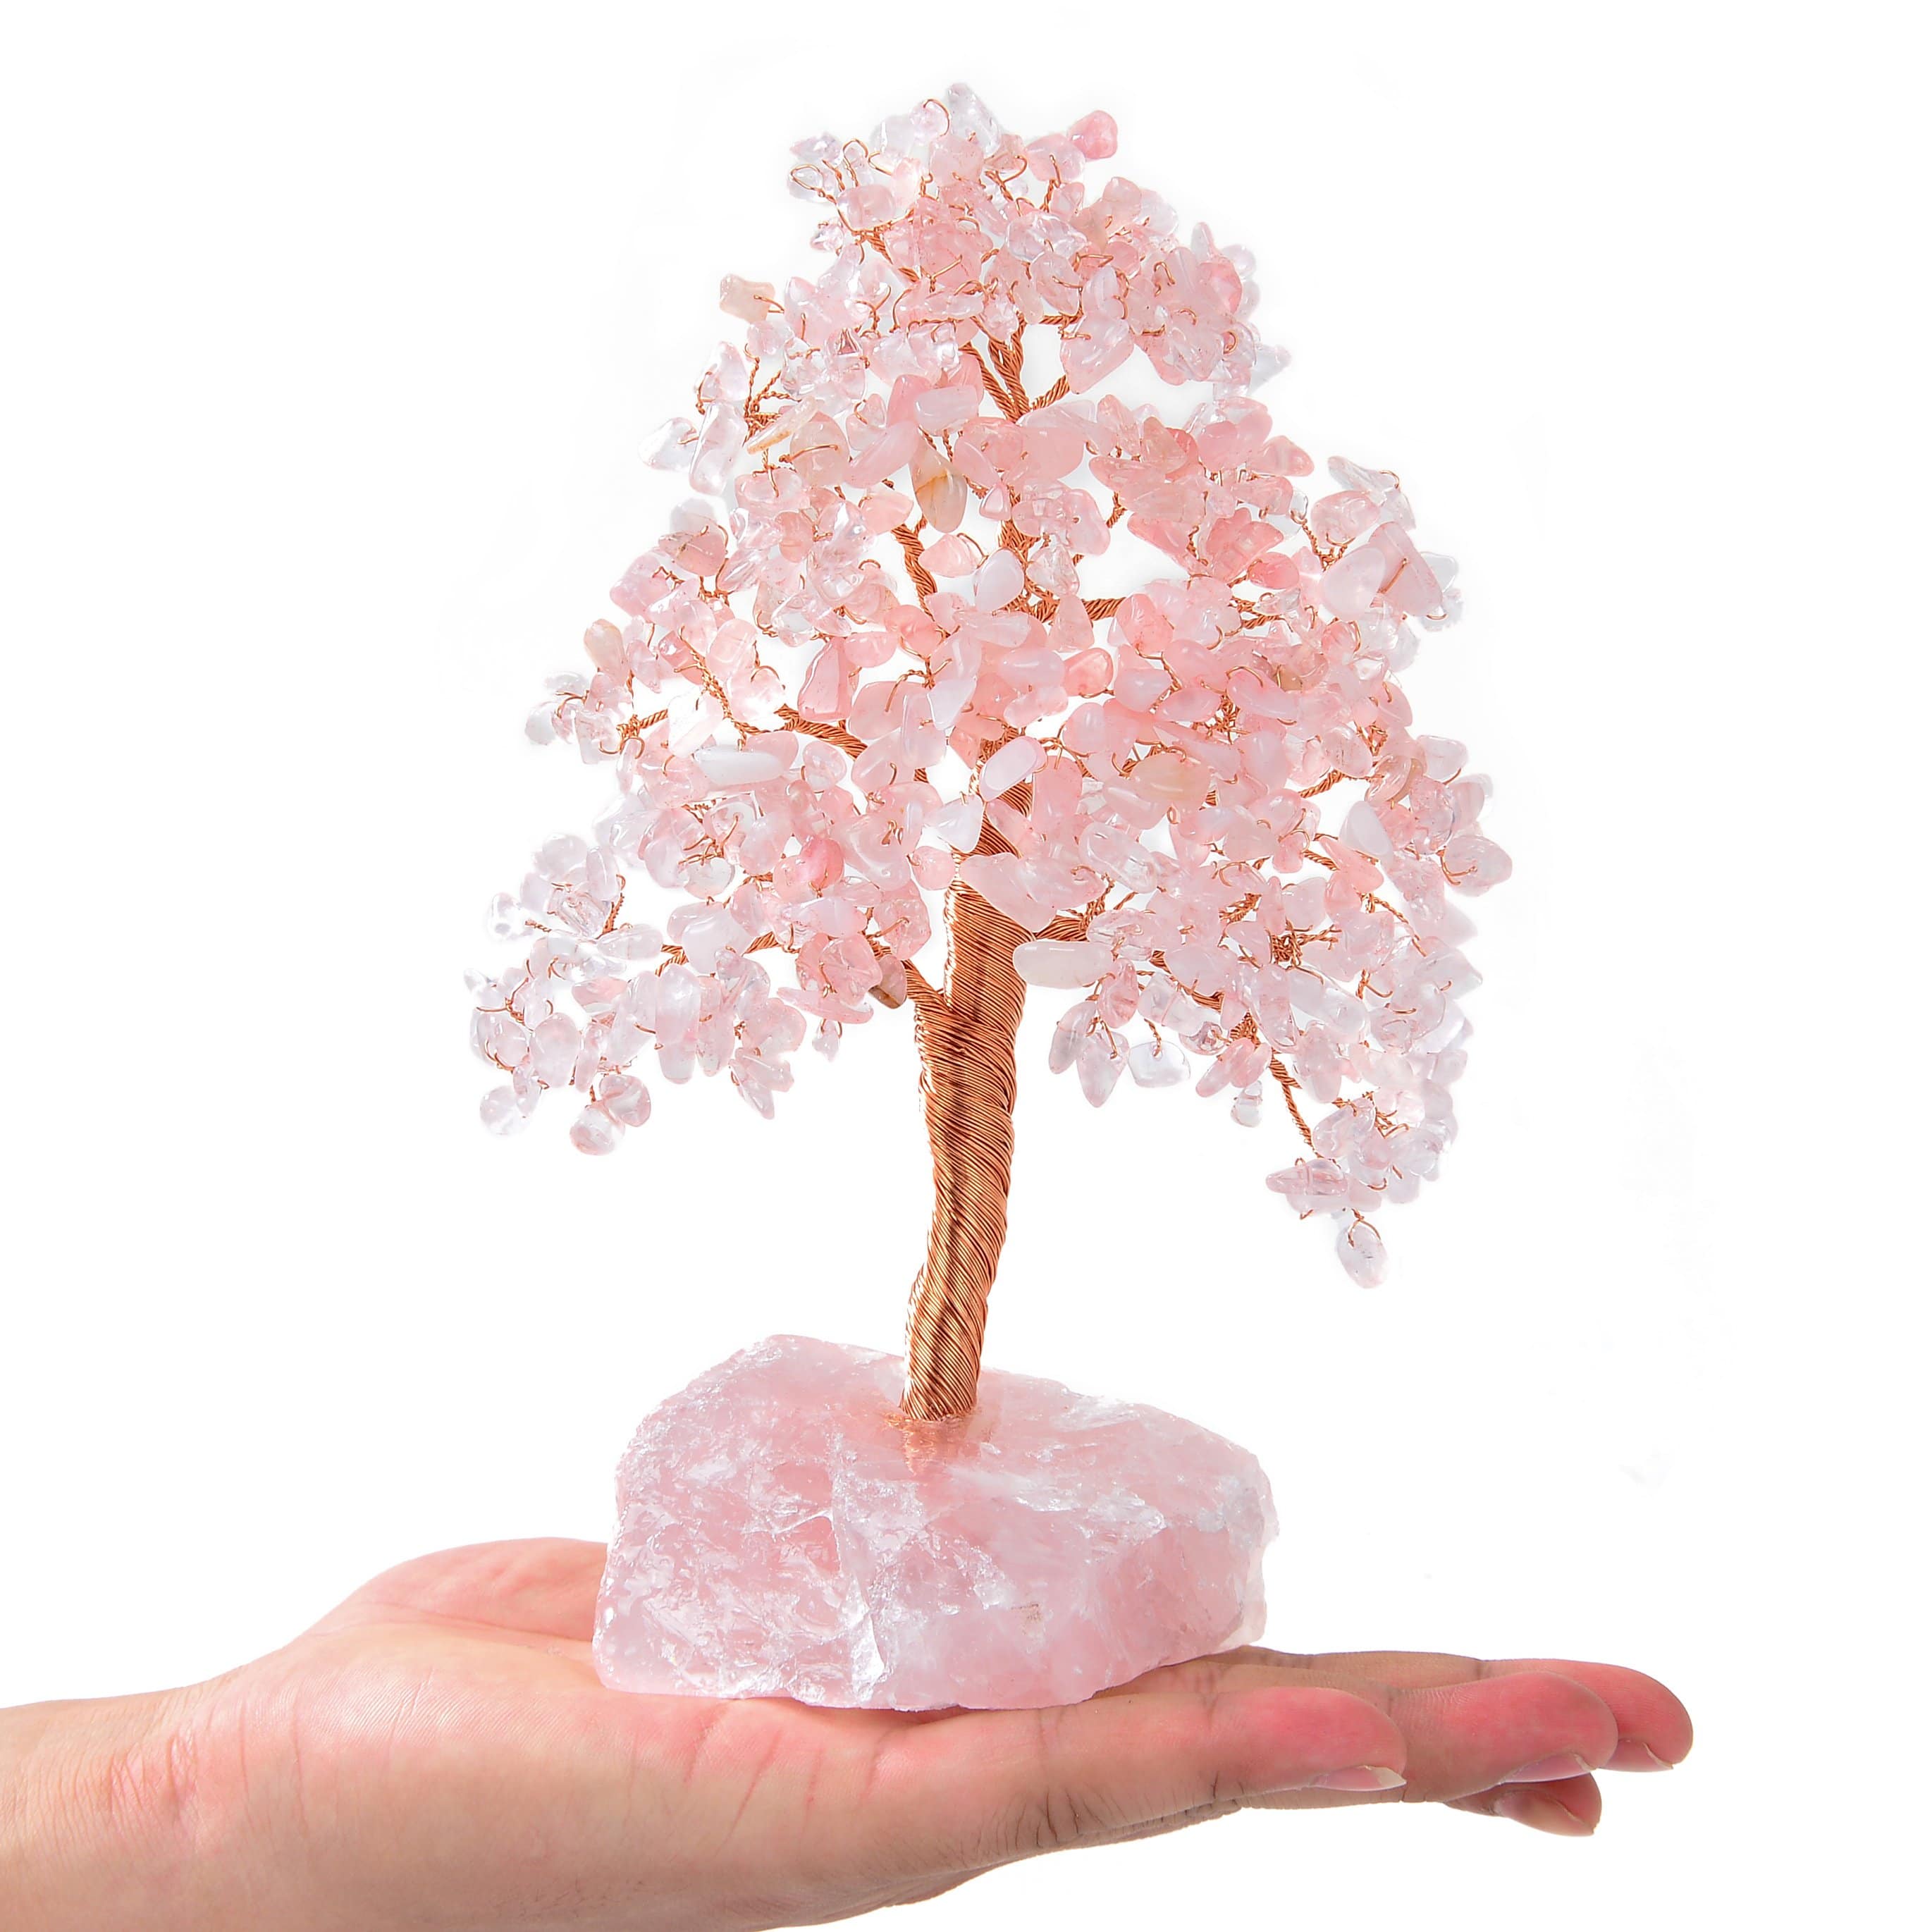 A Guide to Natural Stones: The Healing Properties of Rose Quartz